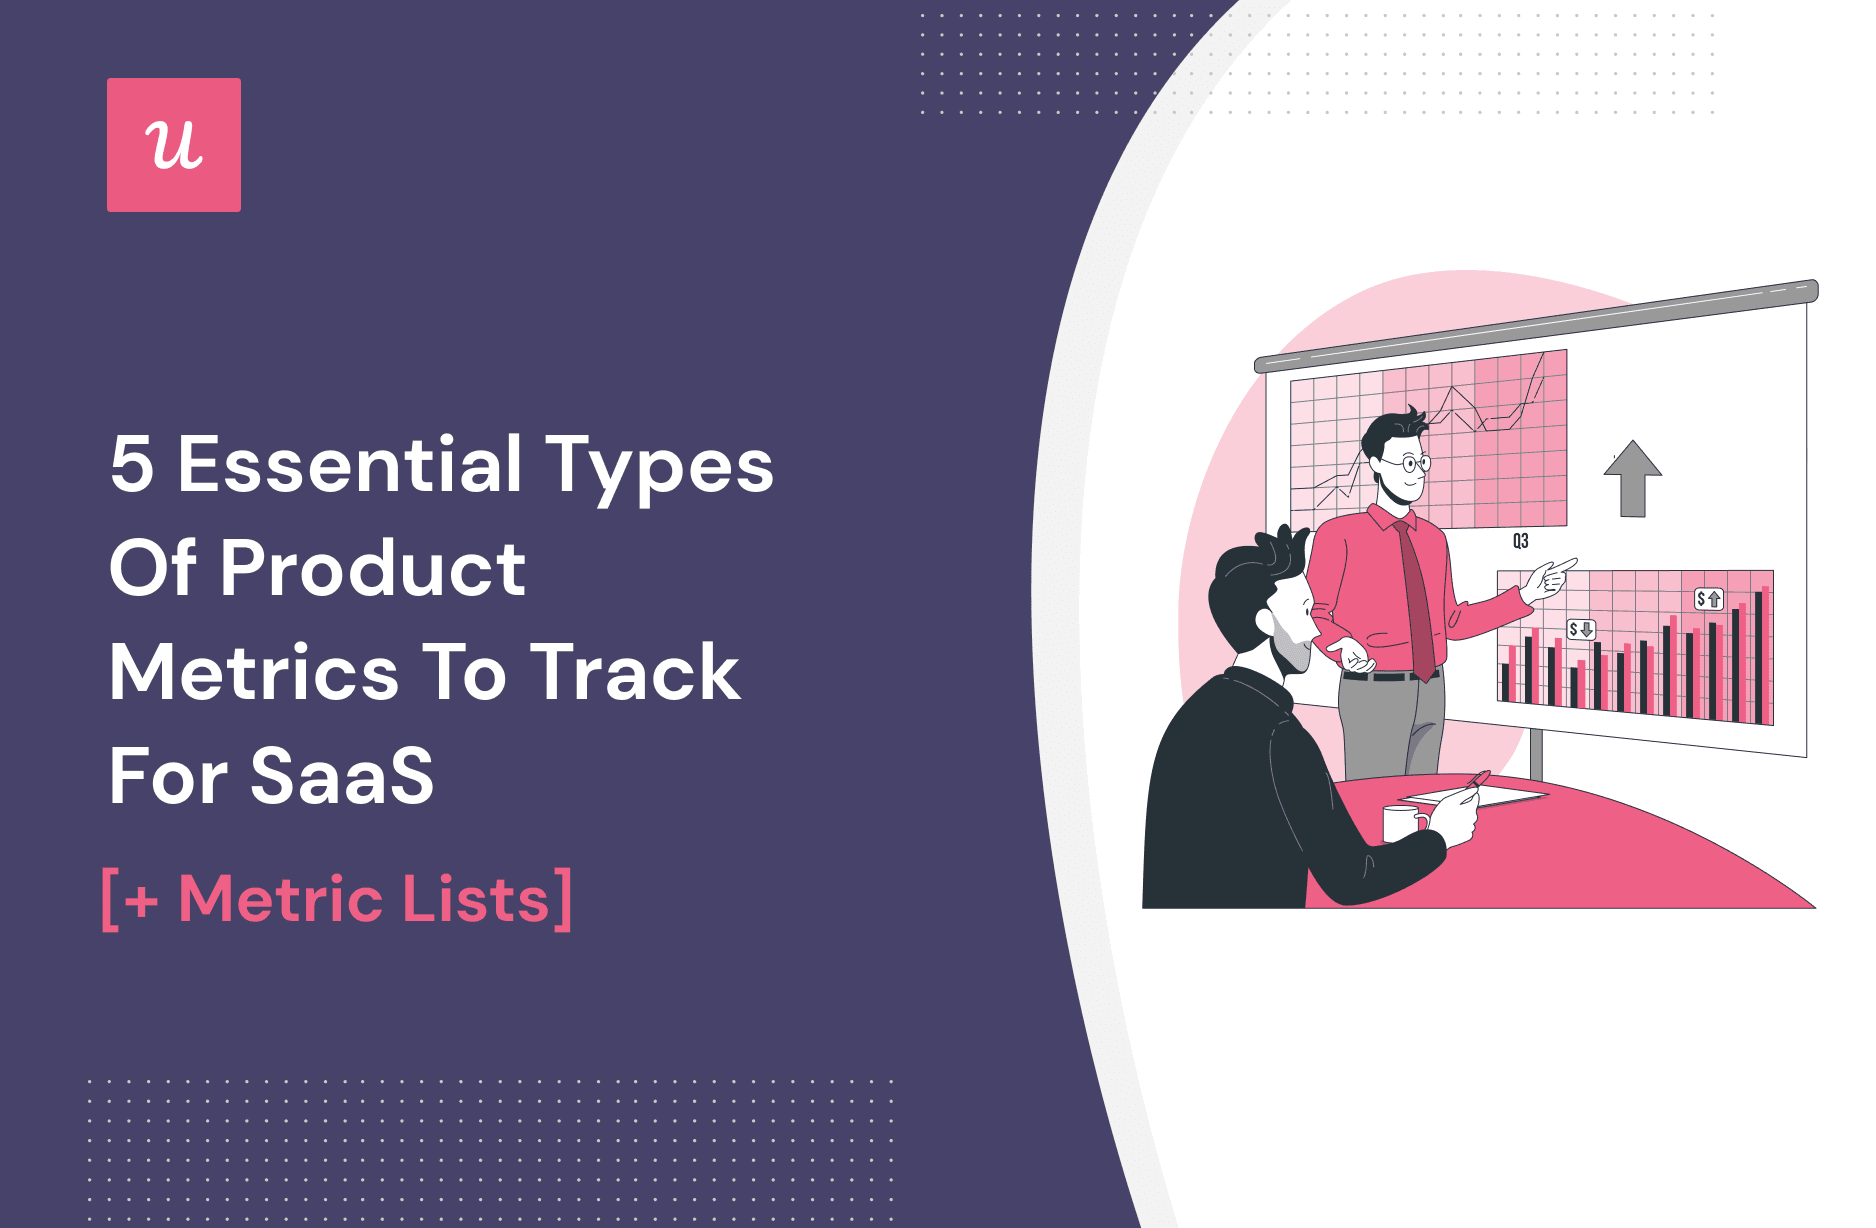 5 Essential Types of Product Metrics to Track For SaaS [+ Metric Lists] cover